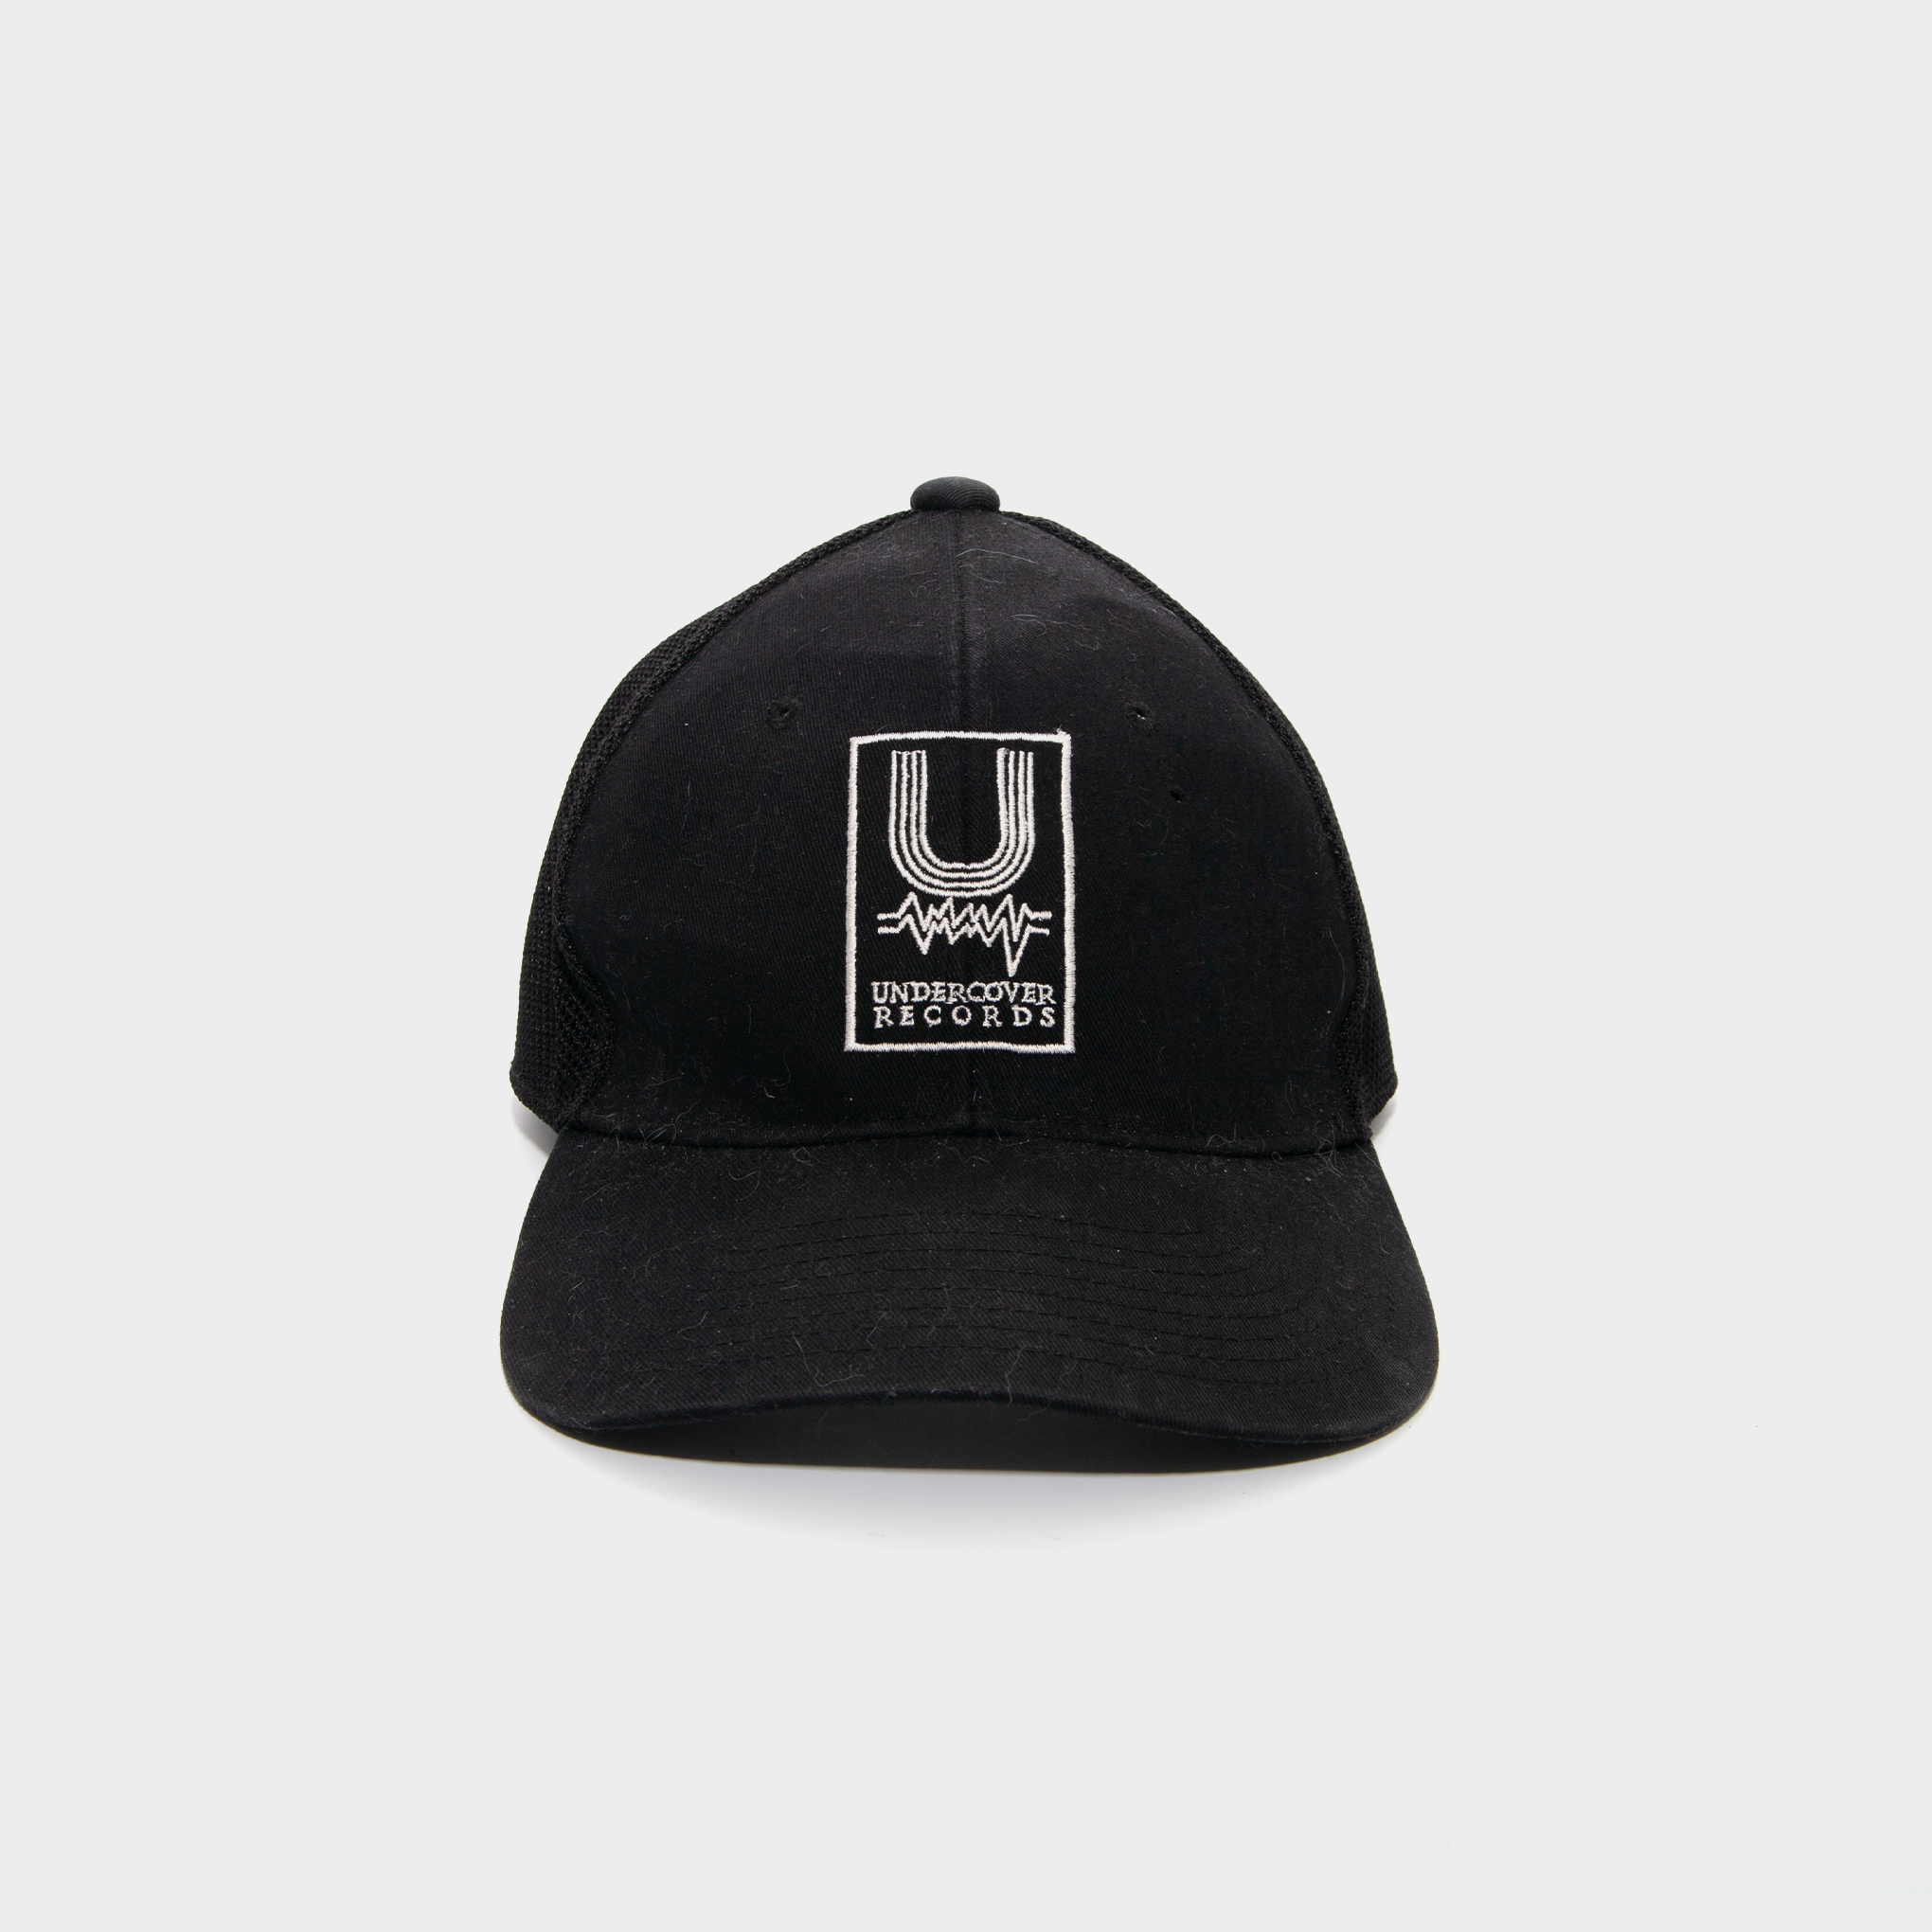 EMBROIDERY UNDERCOVER RECORDS TRUCKER CAP [USED]